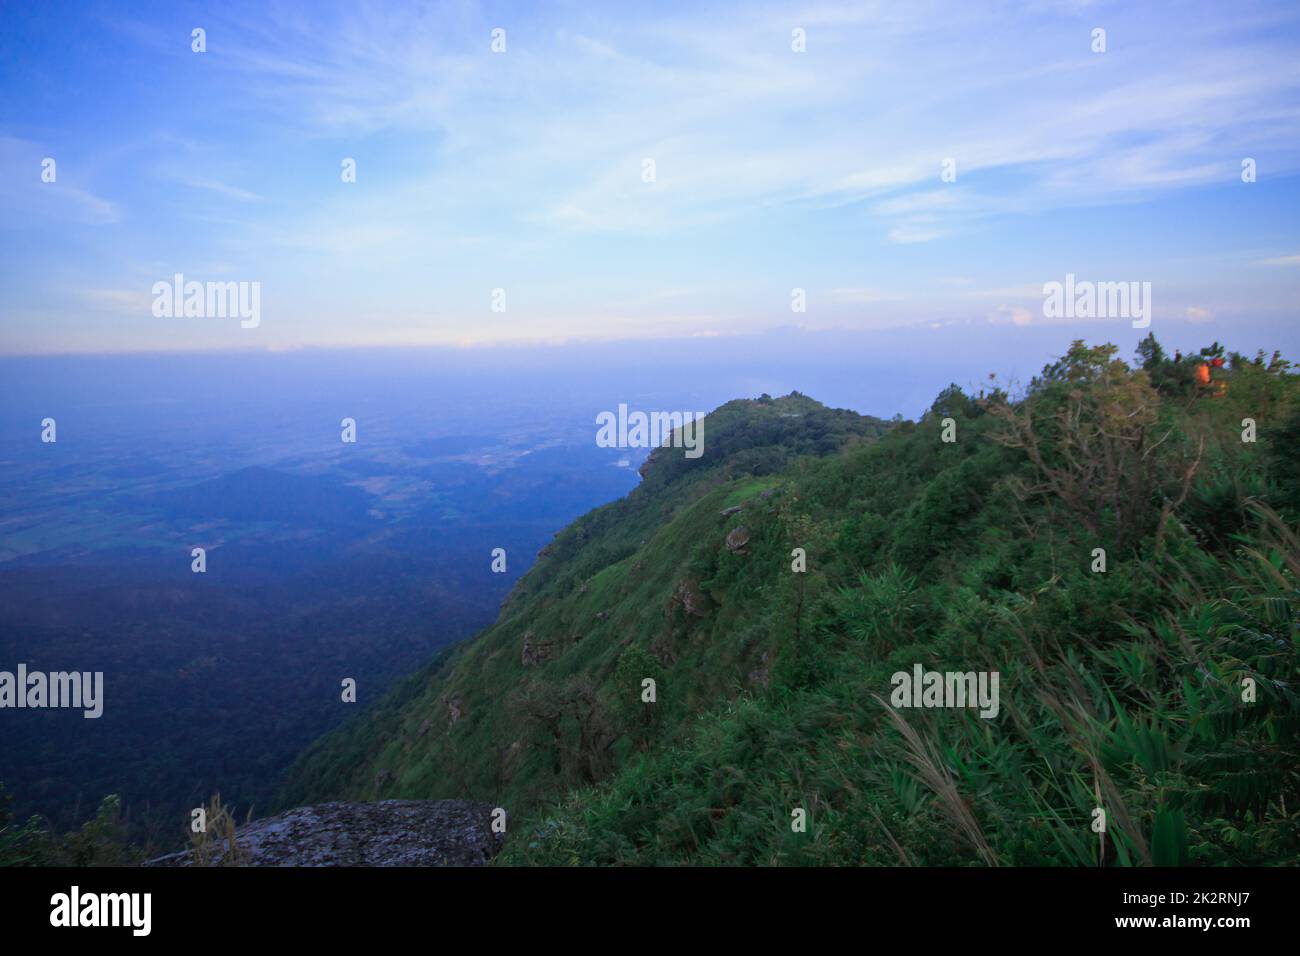 The landscape of the evening sky with the high mountains. Stock Photo